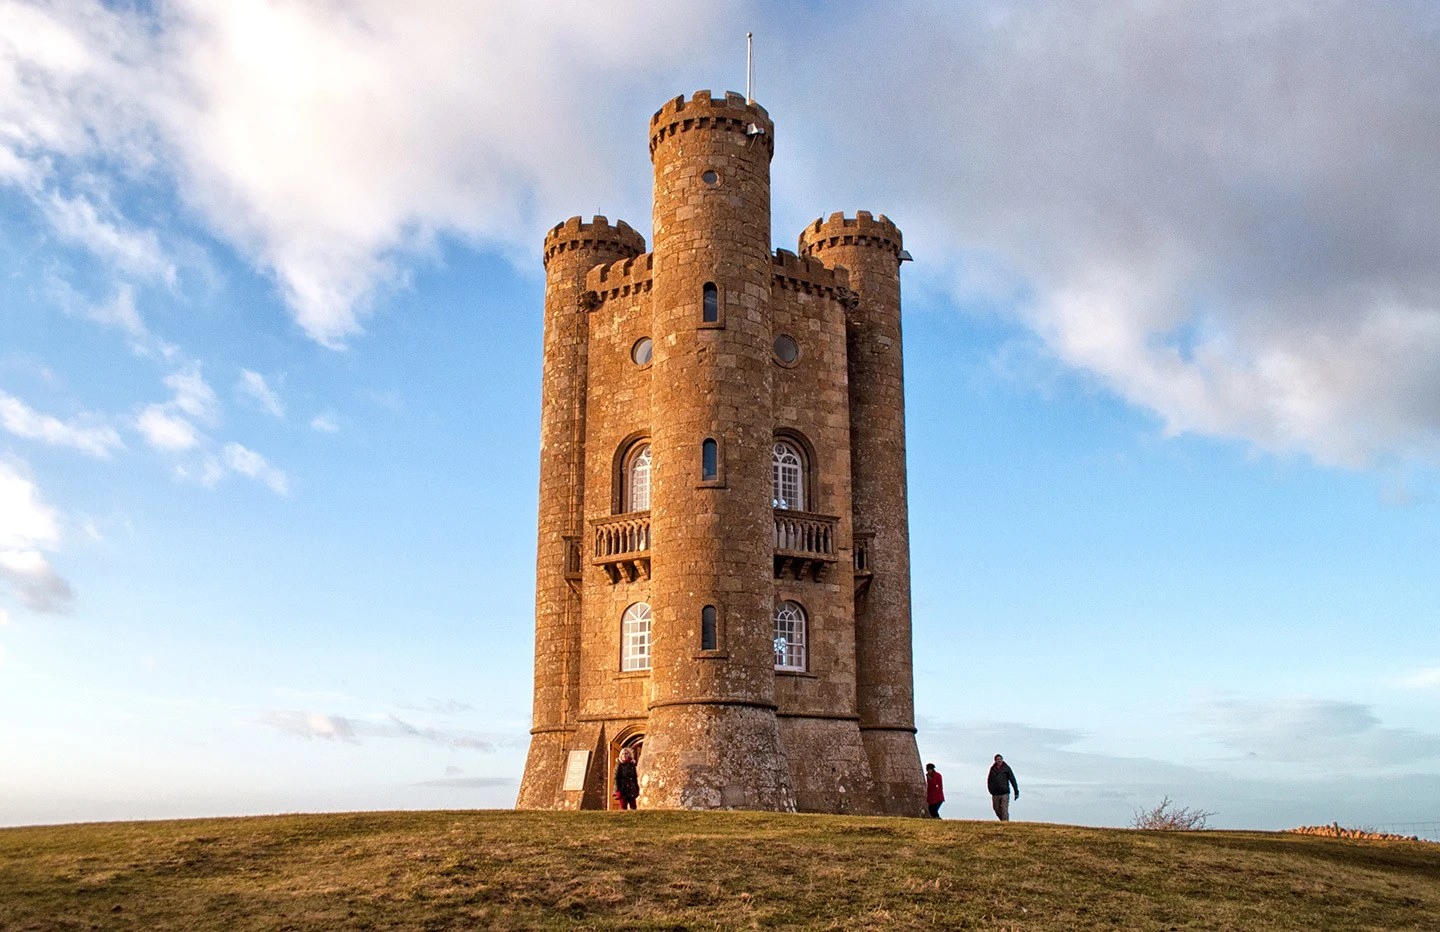 The Broadway Tower in the Cotswolds